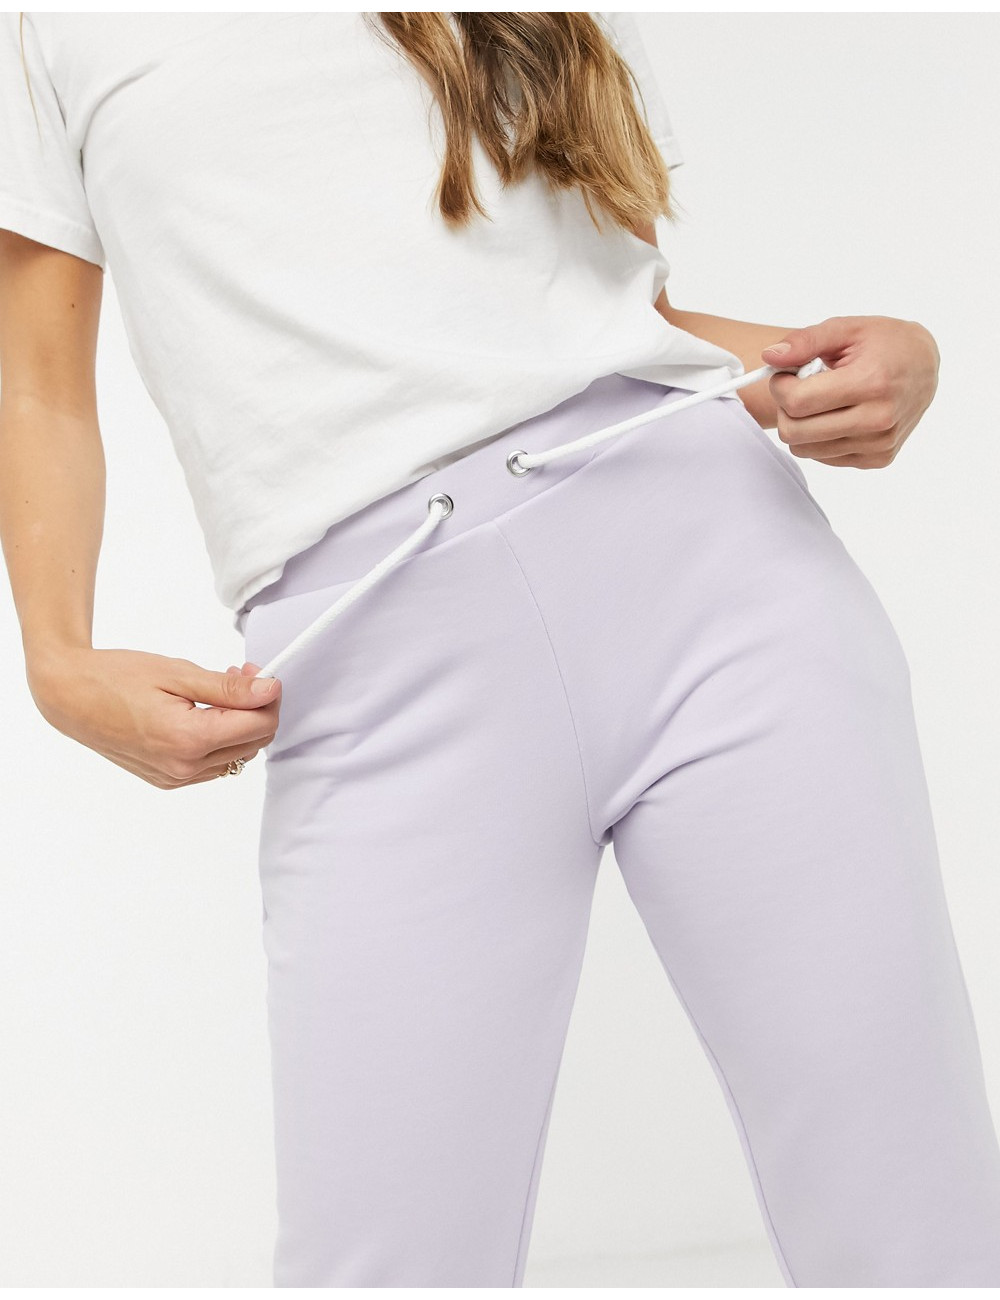 Pieces joggers in lilac